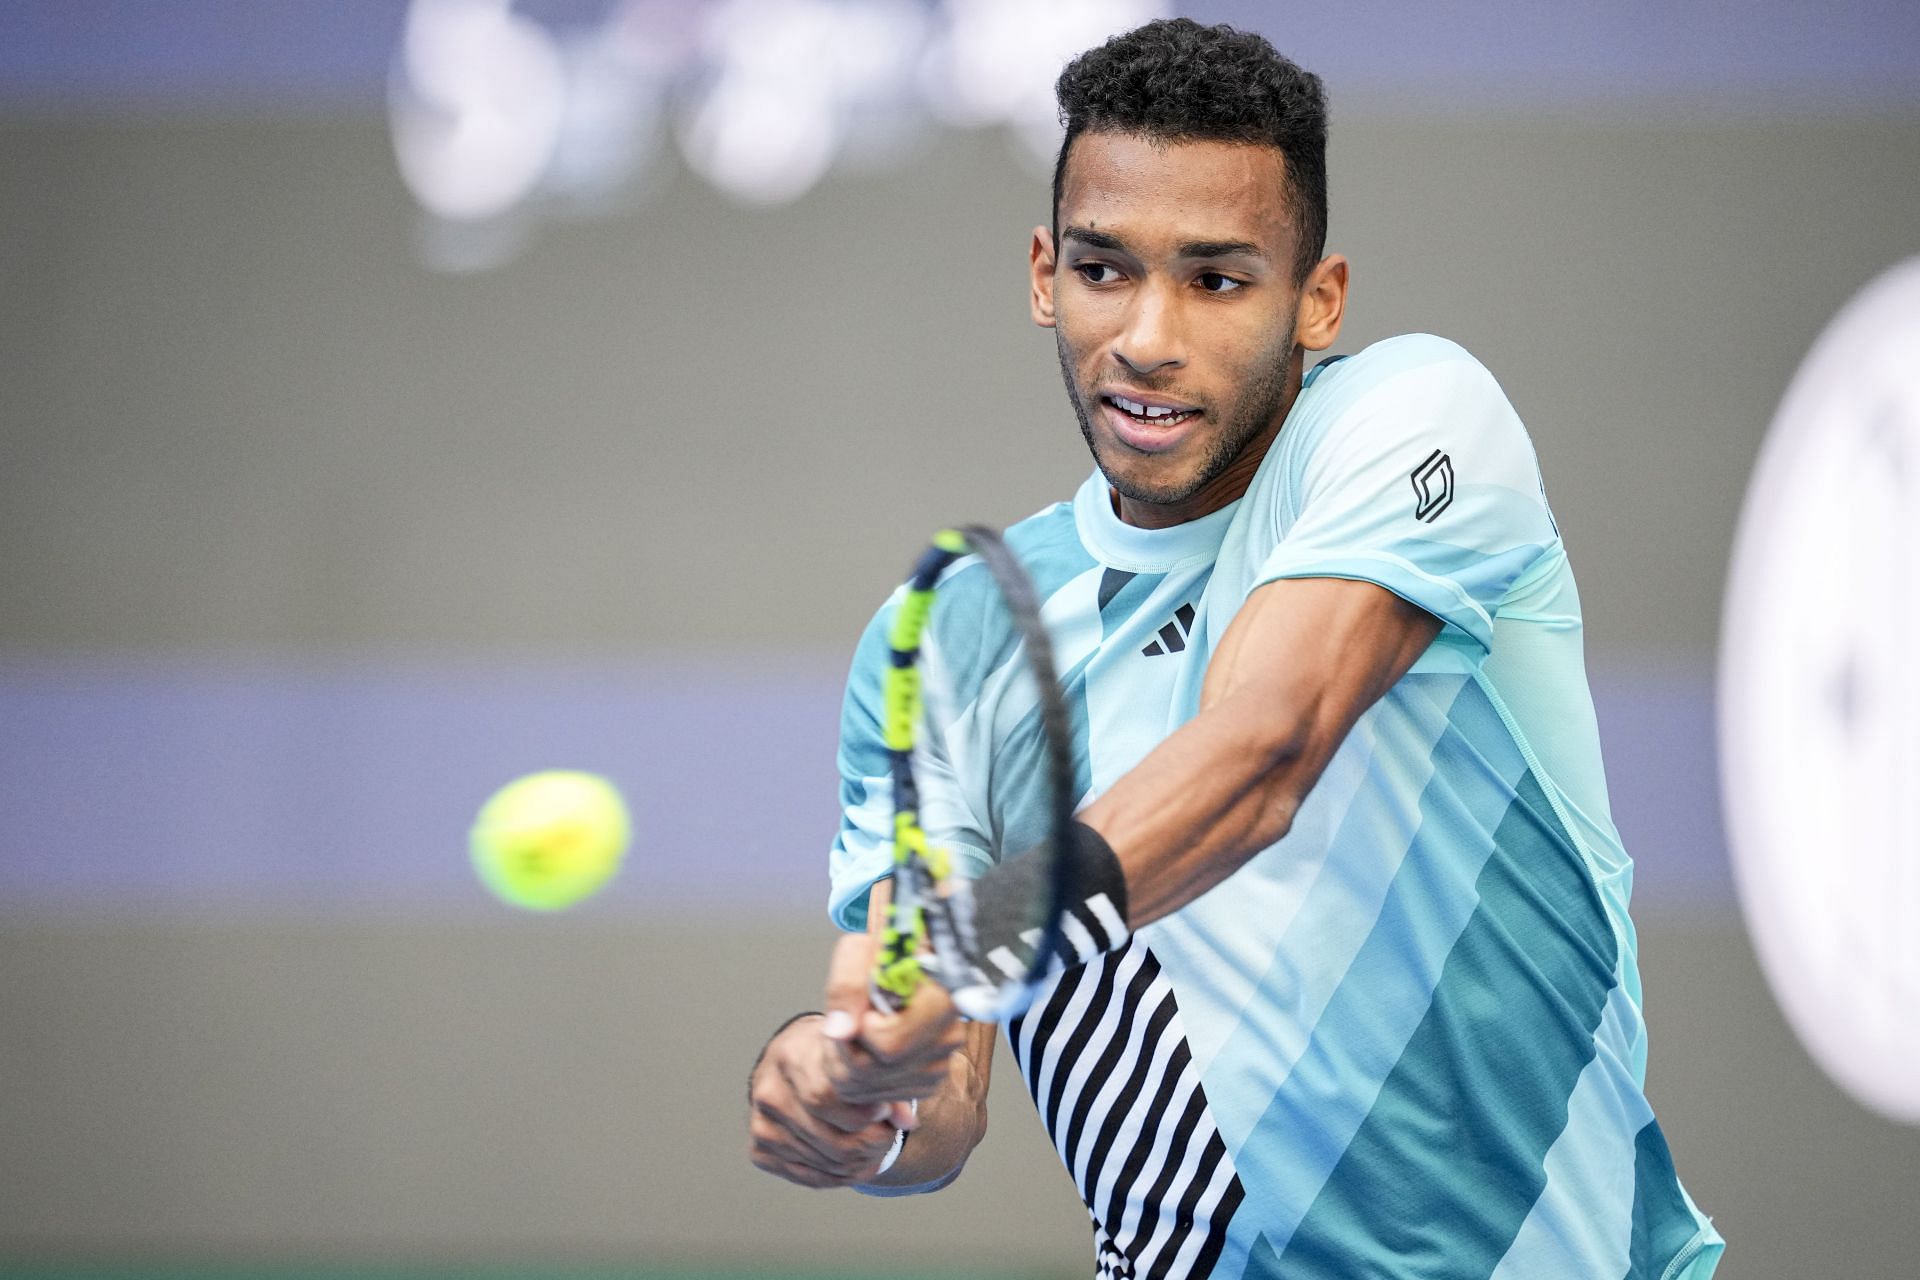 Felix Auger-Aliassime in action at the China Open